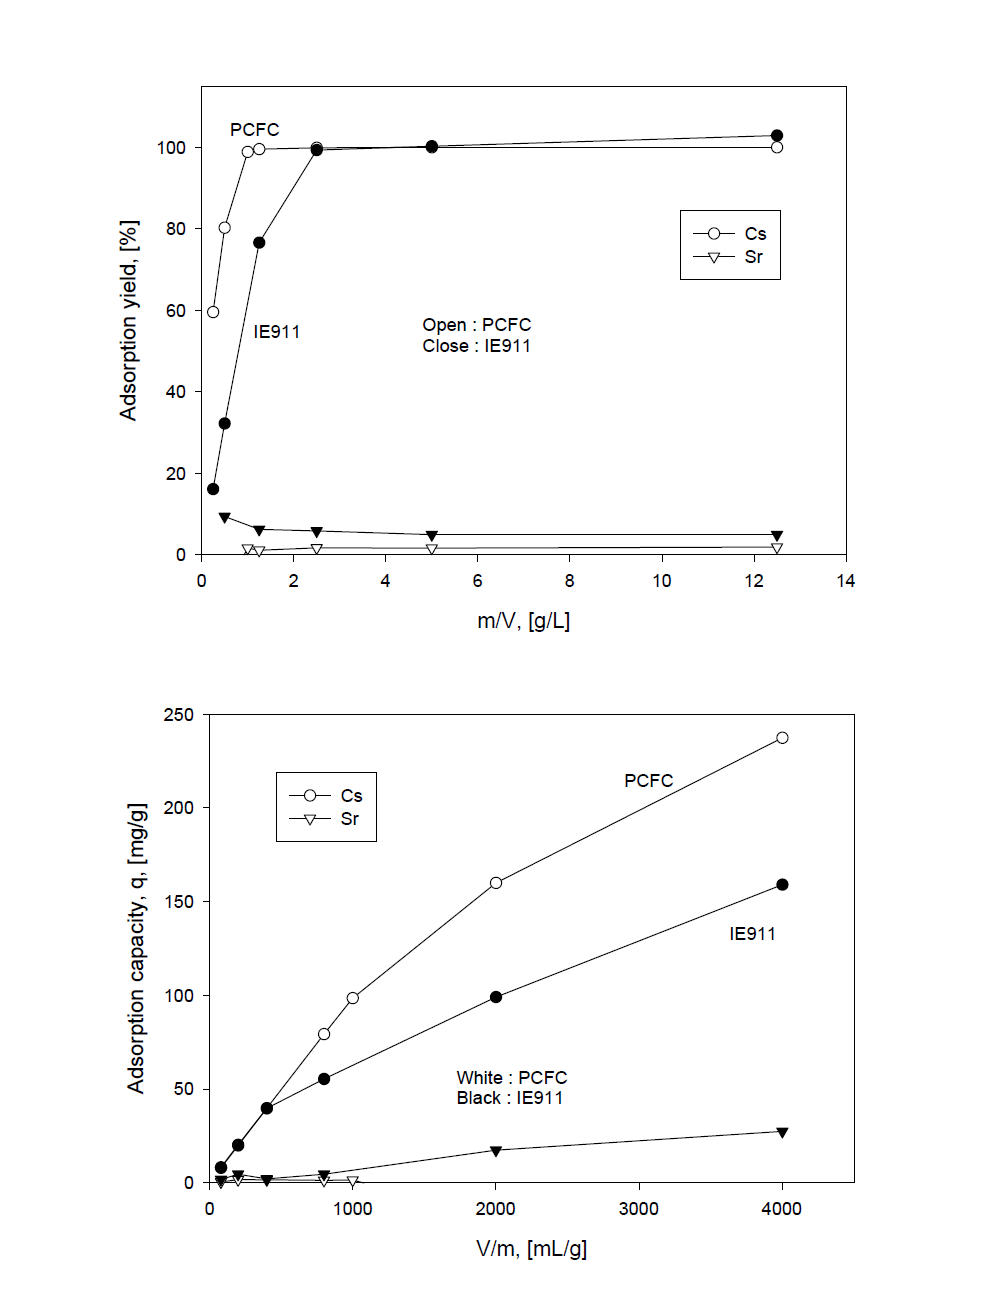 Adsorption yield of Cs and Sr by IE911 and PCFC with ratio of m/V(a), and adsorption capacity of Cs and Sr by IE911 and PCFC with ratio of V/m(b),